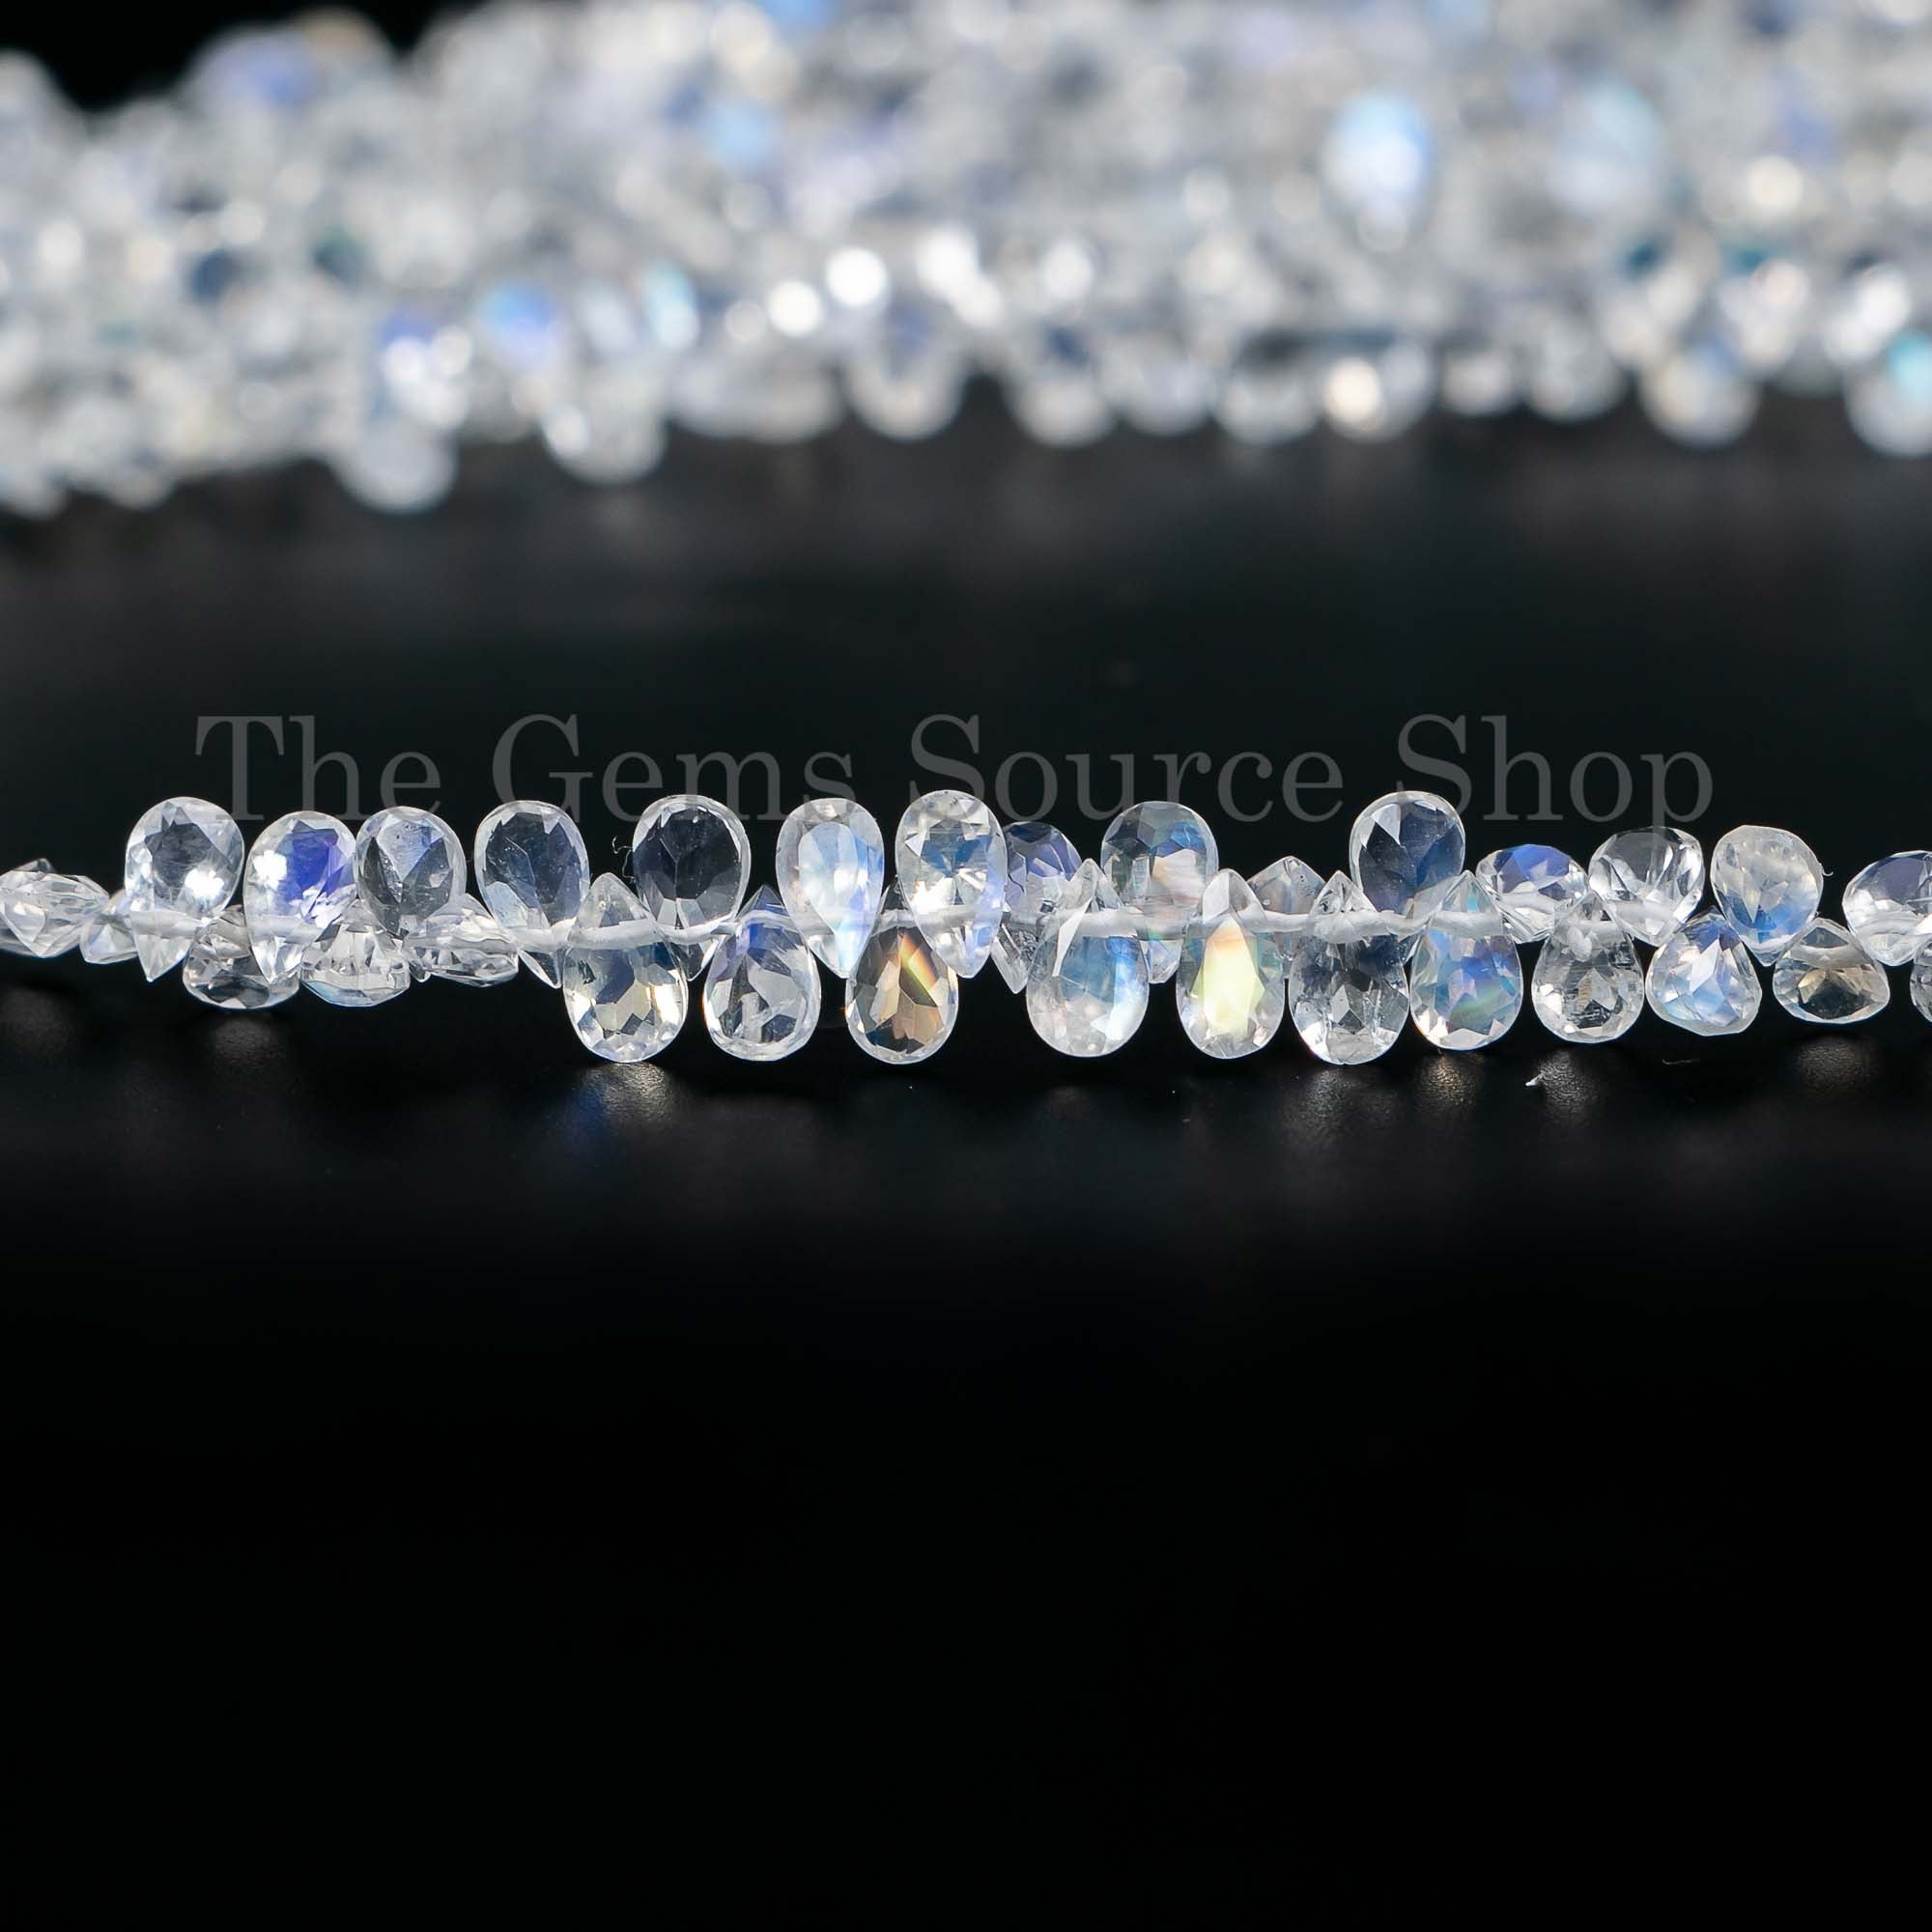 Super Top Quality Rainbow Moonstone Faceted Pear Briolette, Pear SHape Beads, Wholesale Beads